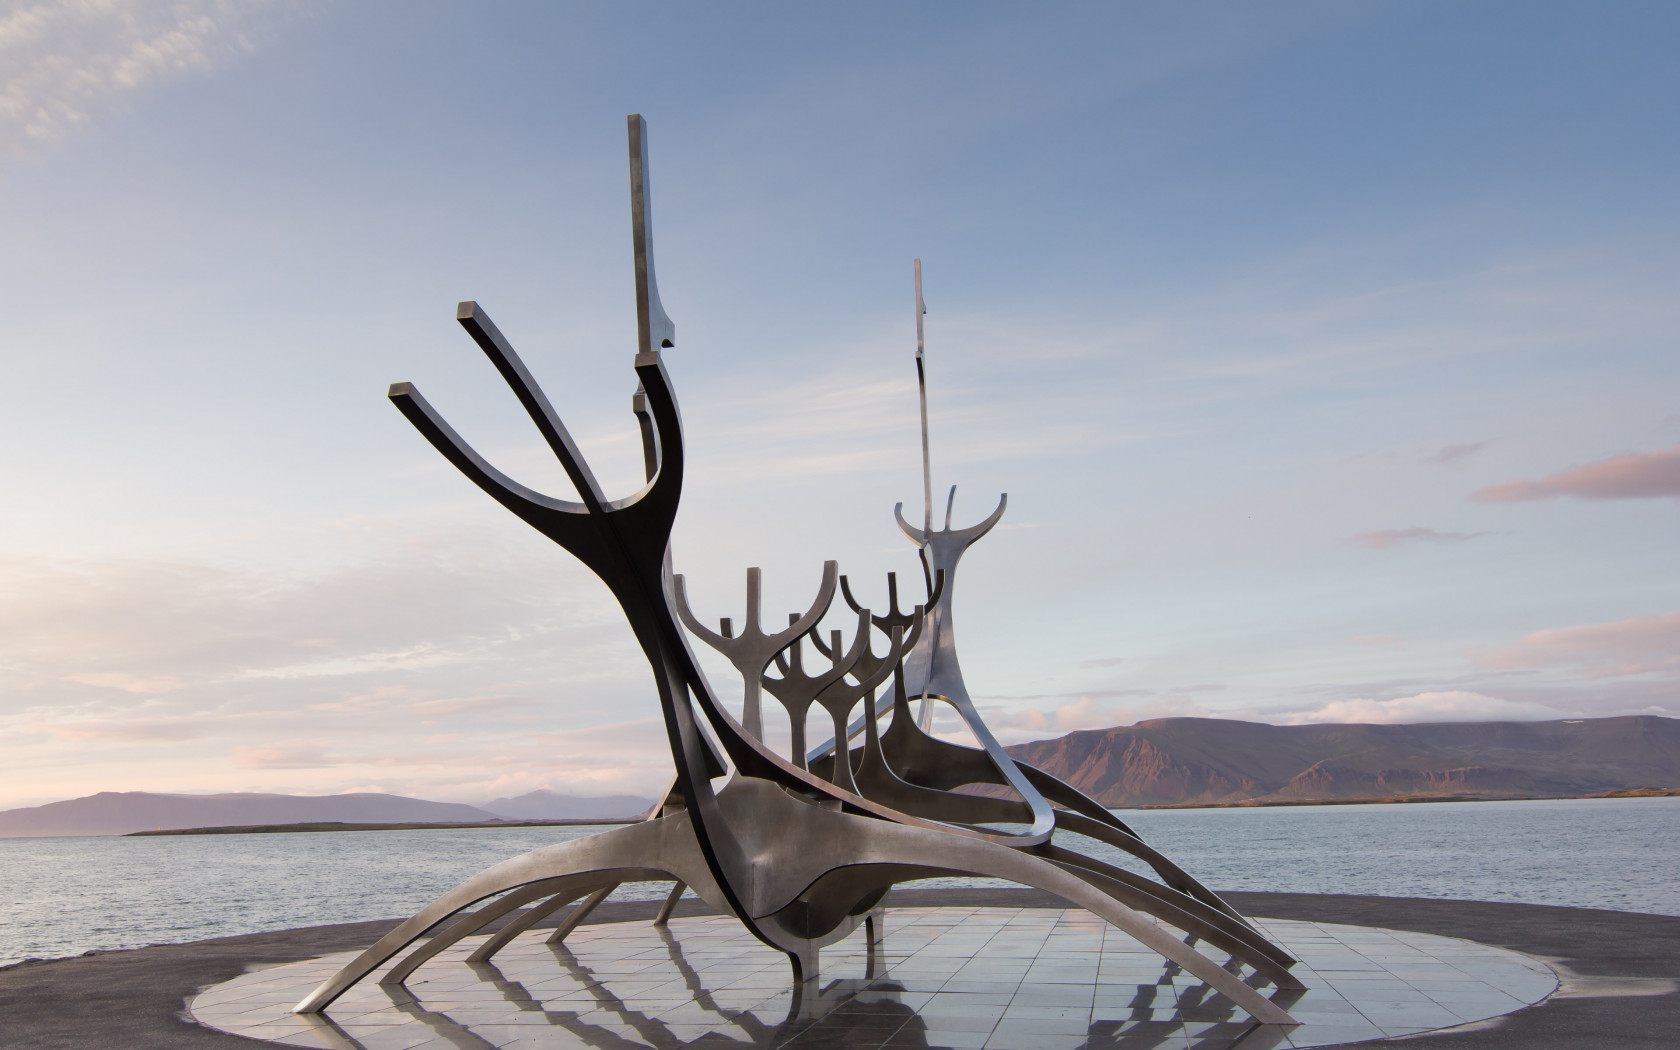 The Sun Voyager from Reykjavik, Iceland wallpaper 1680x1050